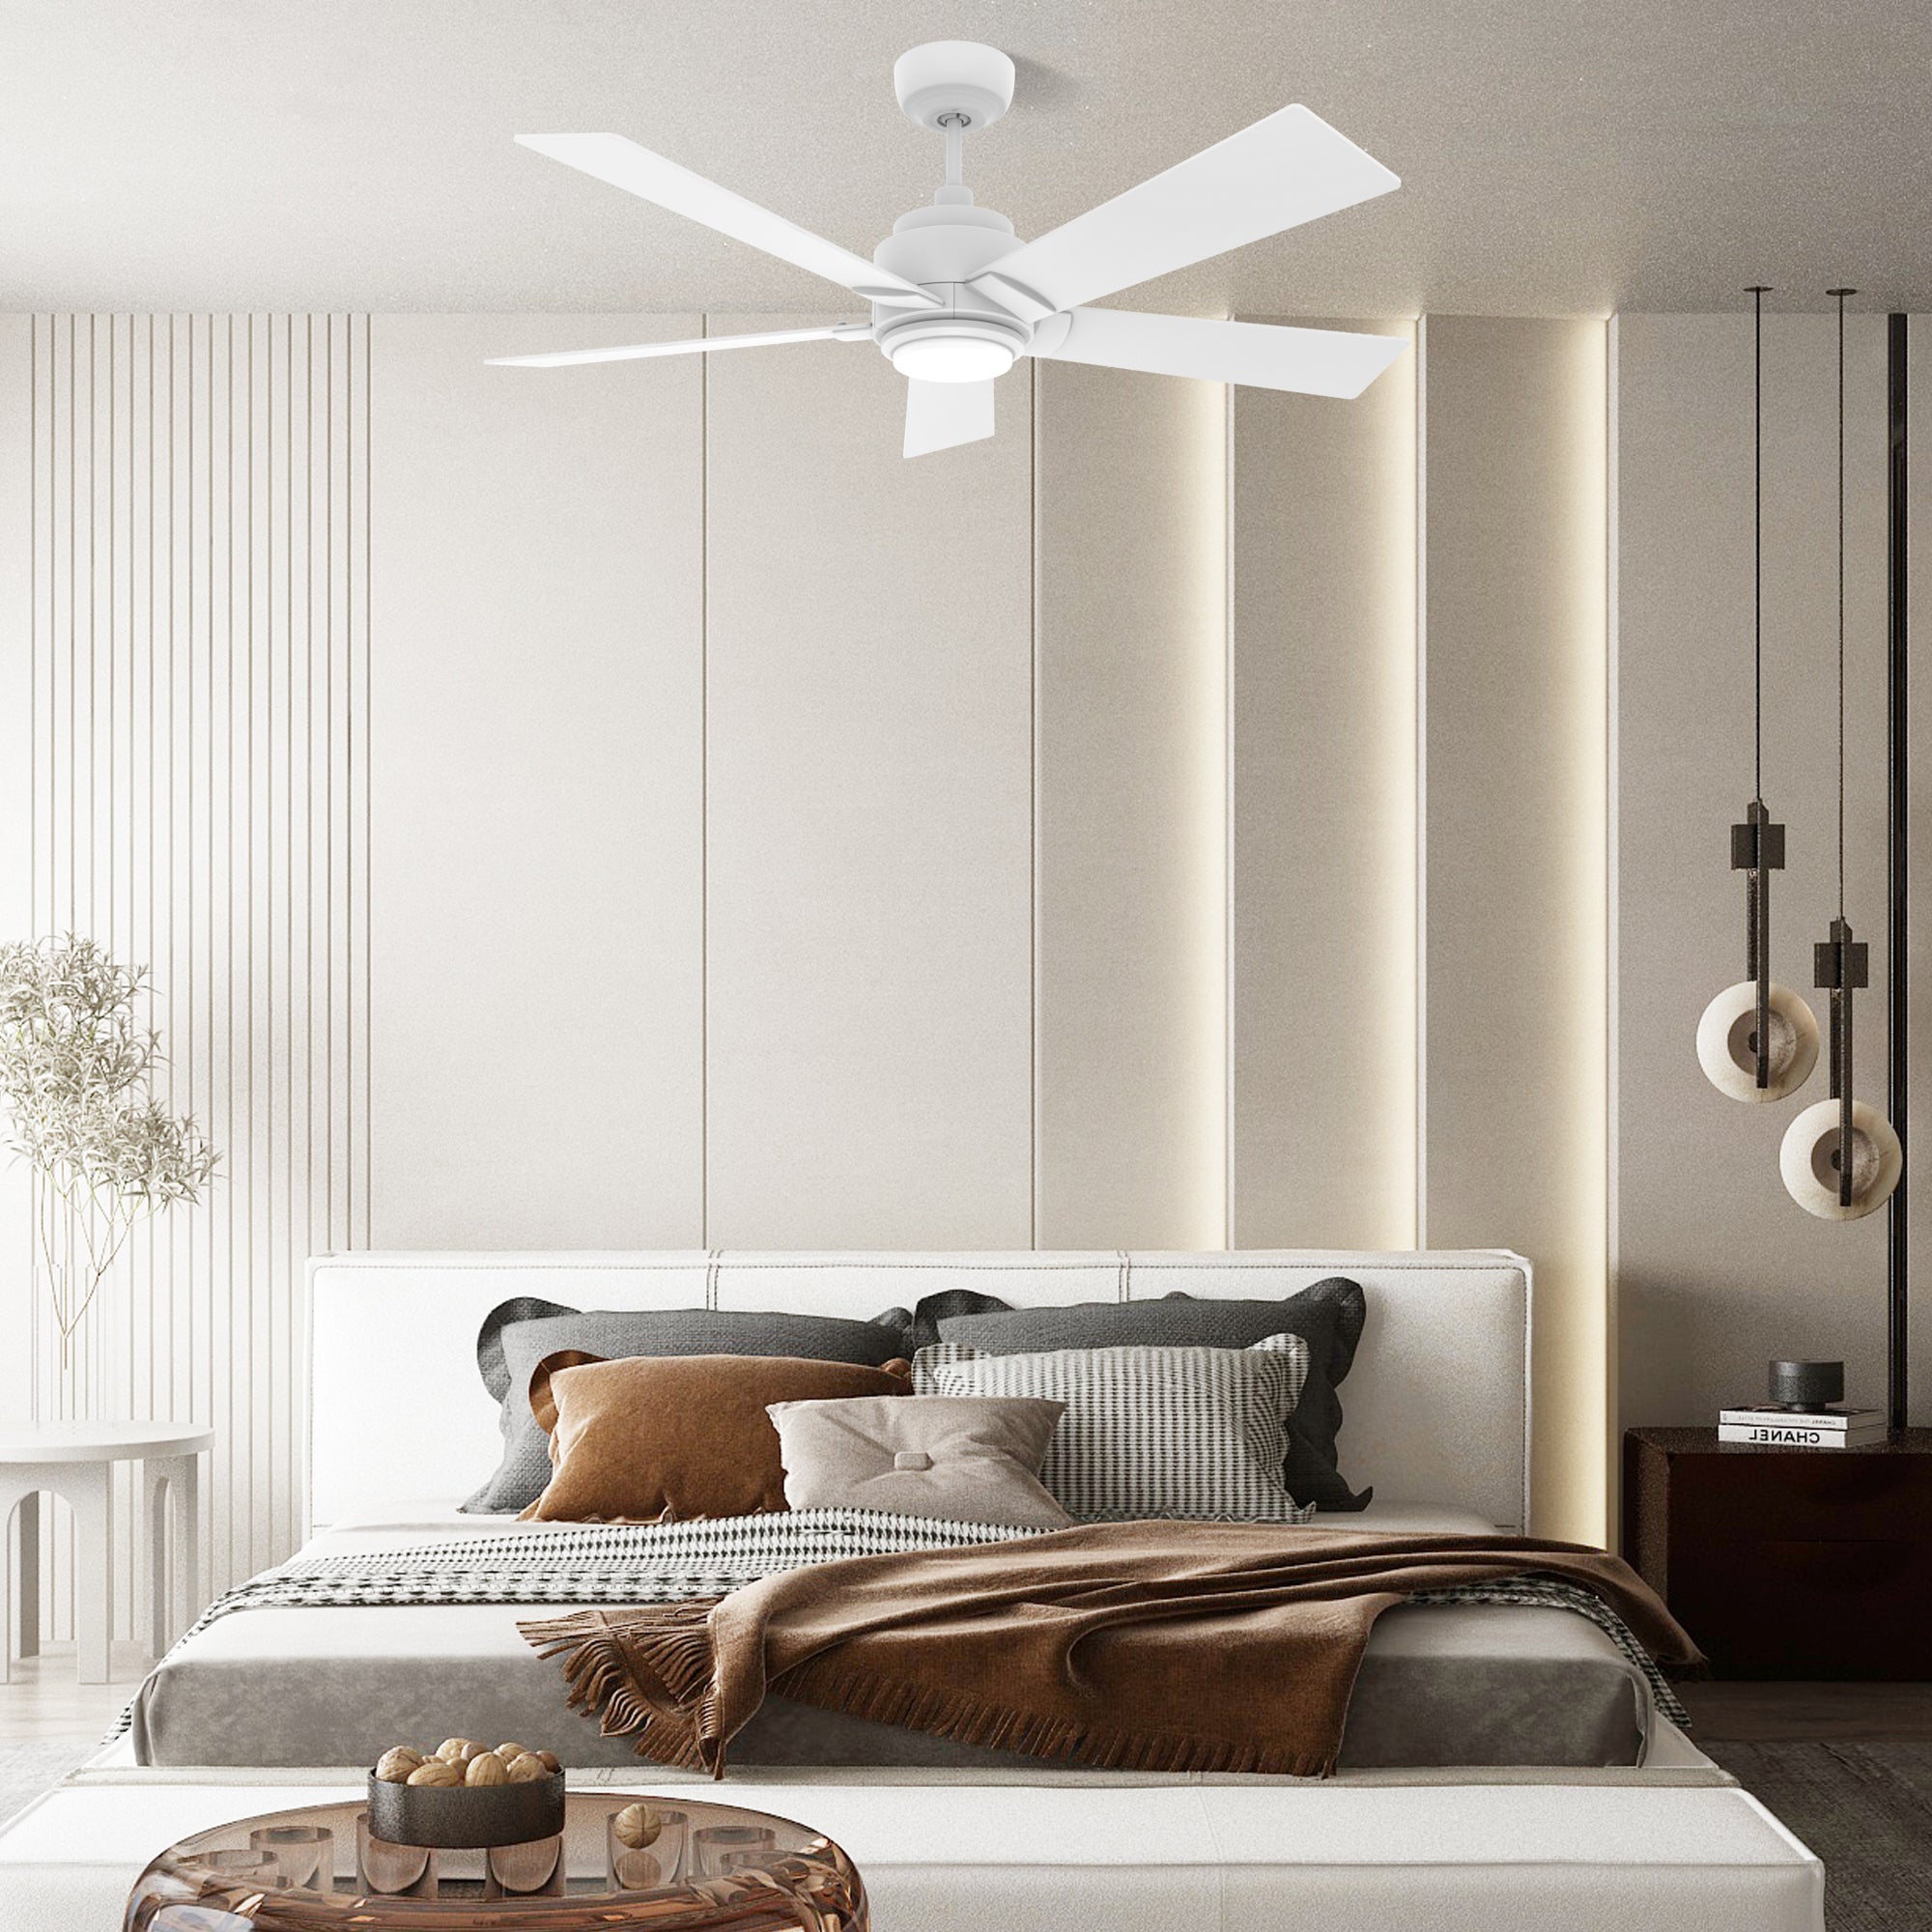 This Aspen 52&#39;&#39; smart ceiling fan keeps your space cool, bright, and stylish. It is a soft modern masterpiece perfect for your large indoor living spaces. This Wifi smart ceiling fan is a simplicity designing with Black finish, use elegant Plywood blades and has an integrated 4000K LED daylight. The fan features Remote control, Wi-Fi apps, Siri Shortcut and Voice control technology (compatible with Amazon Alexa and Google Home Assistant ) to set fan preferences.